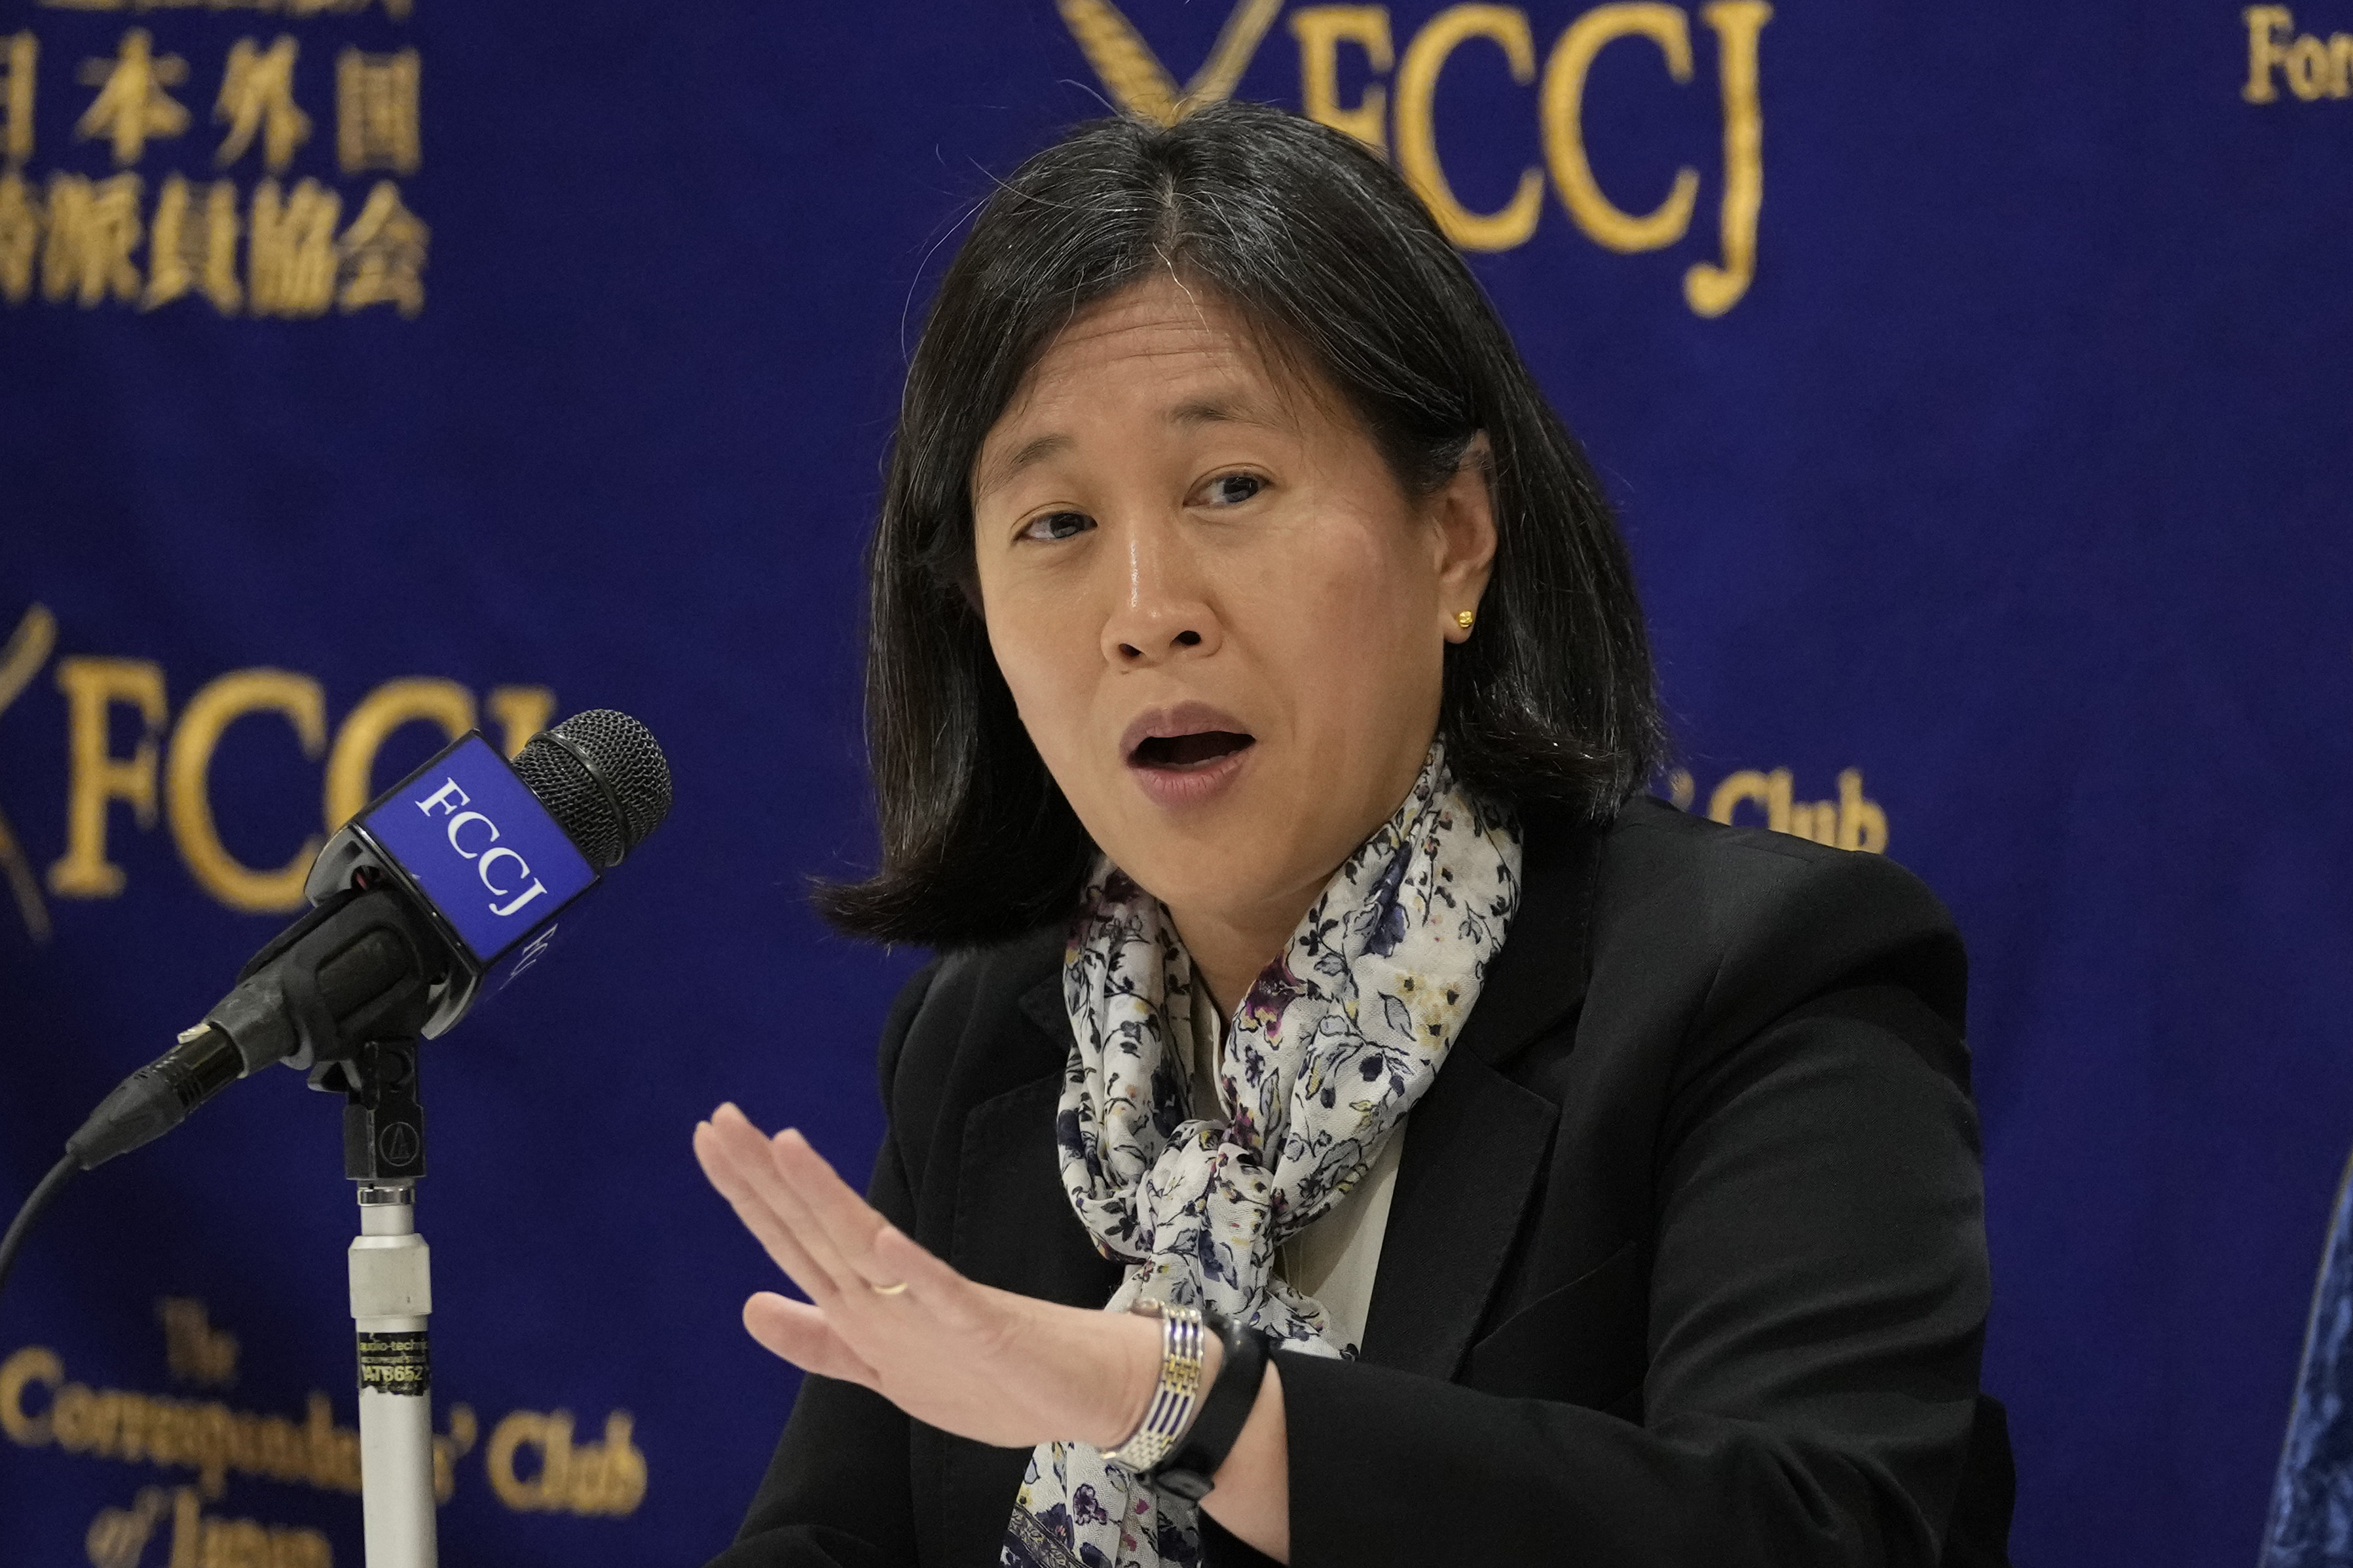 US Trade Representative Katherine Tai says the US and China have a responsibility to the world “to get things right between us”. Photo: AP